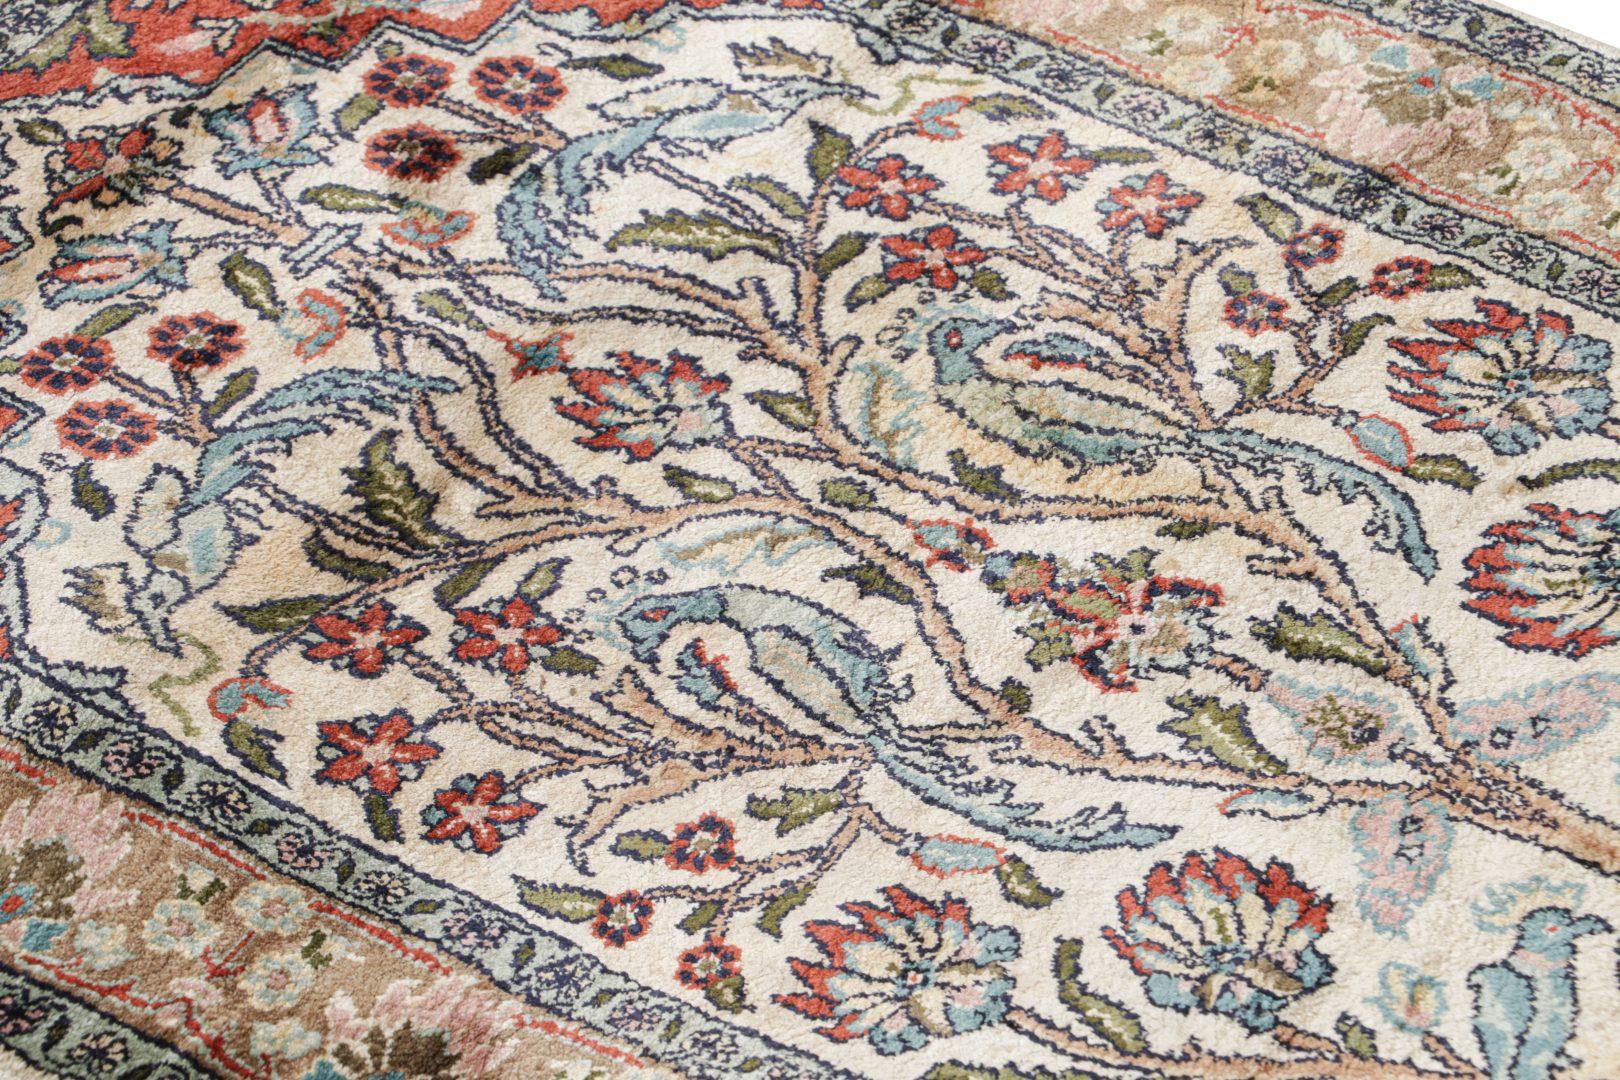 Hand-Knotted Antique Kashmir Rug With Pictorials and Floral Patterns, From Rug & Kilim For Sale